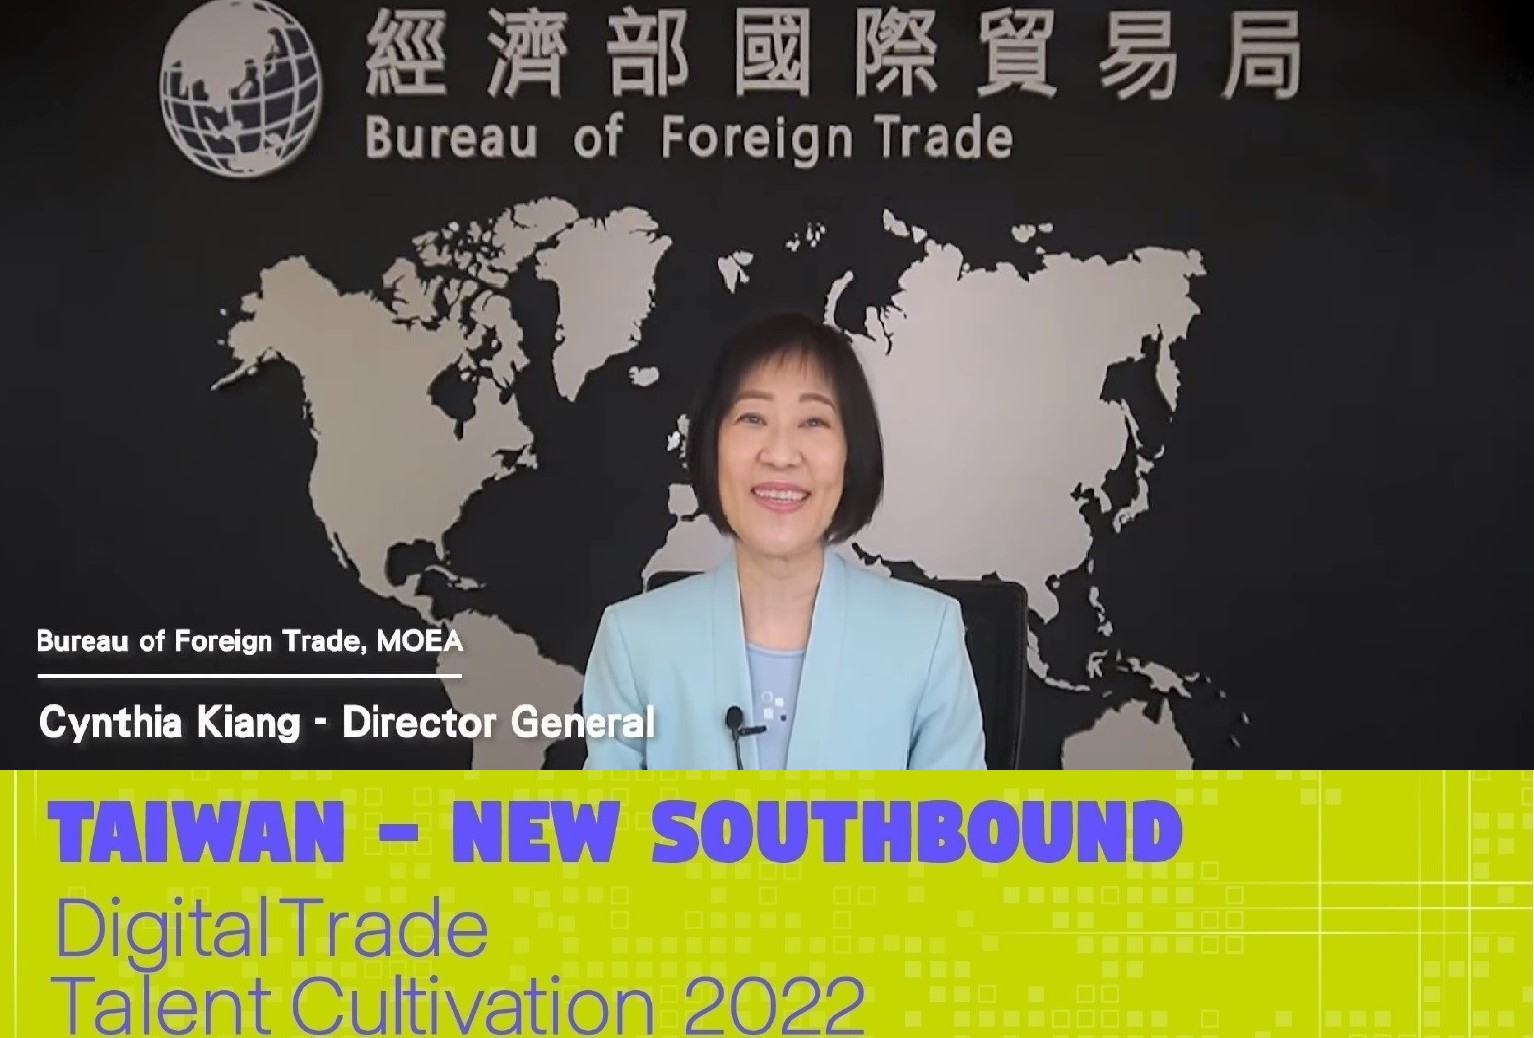 Taiwan-New Southbound Digital Trade Talent Cultivation 2022: Succeeding in Cross-border E-commerce